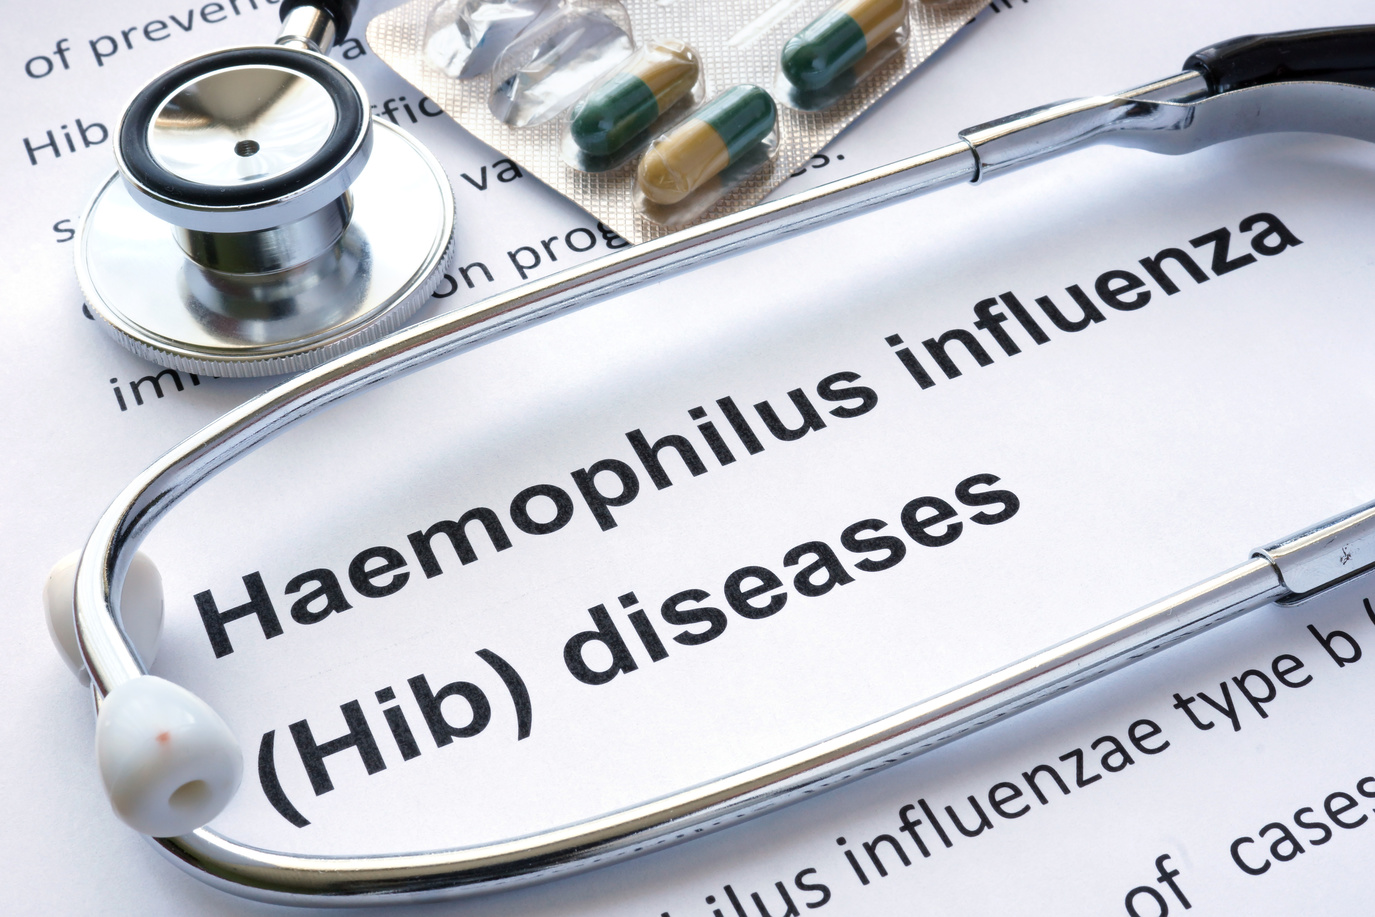 Paper with diagnosis Haemophilus influenza (Hib) diseases and stethoscope.